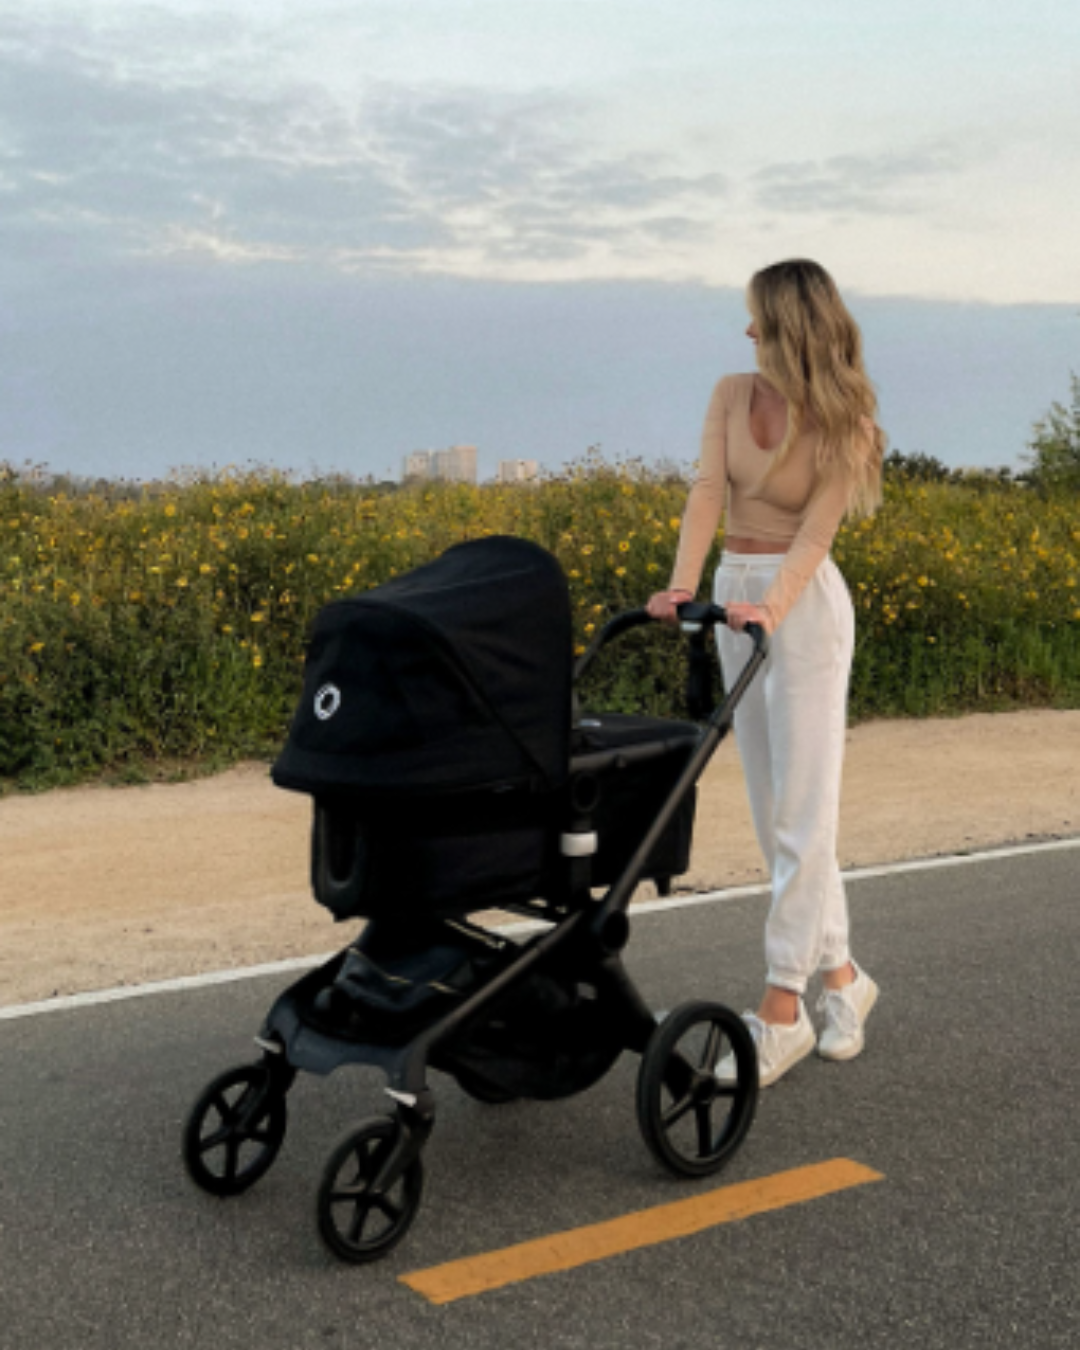 A mom walks her baby in a Bugaboo Fox 5 on a paved road. In the background are a flower field and a partly cloudy sky.